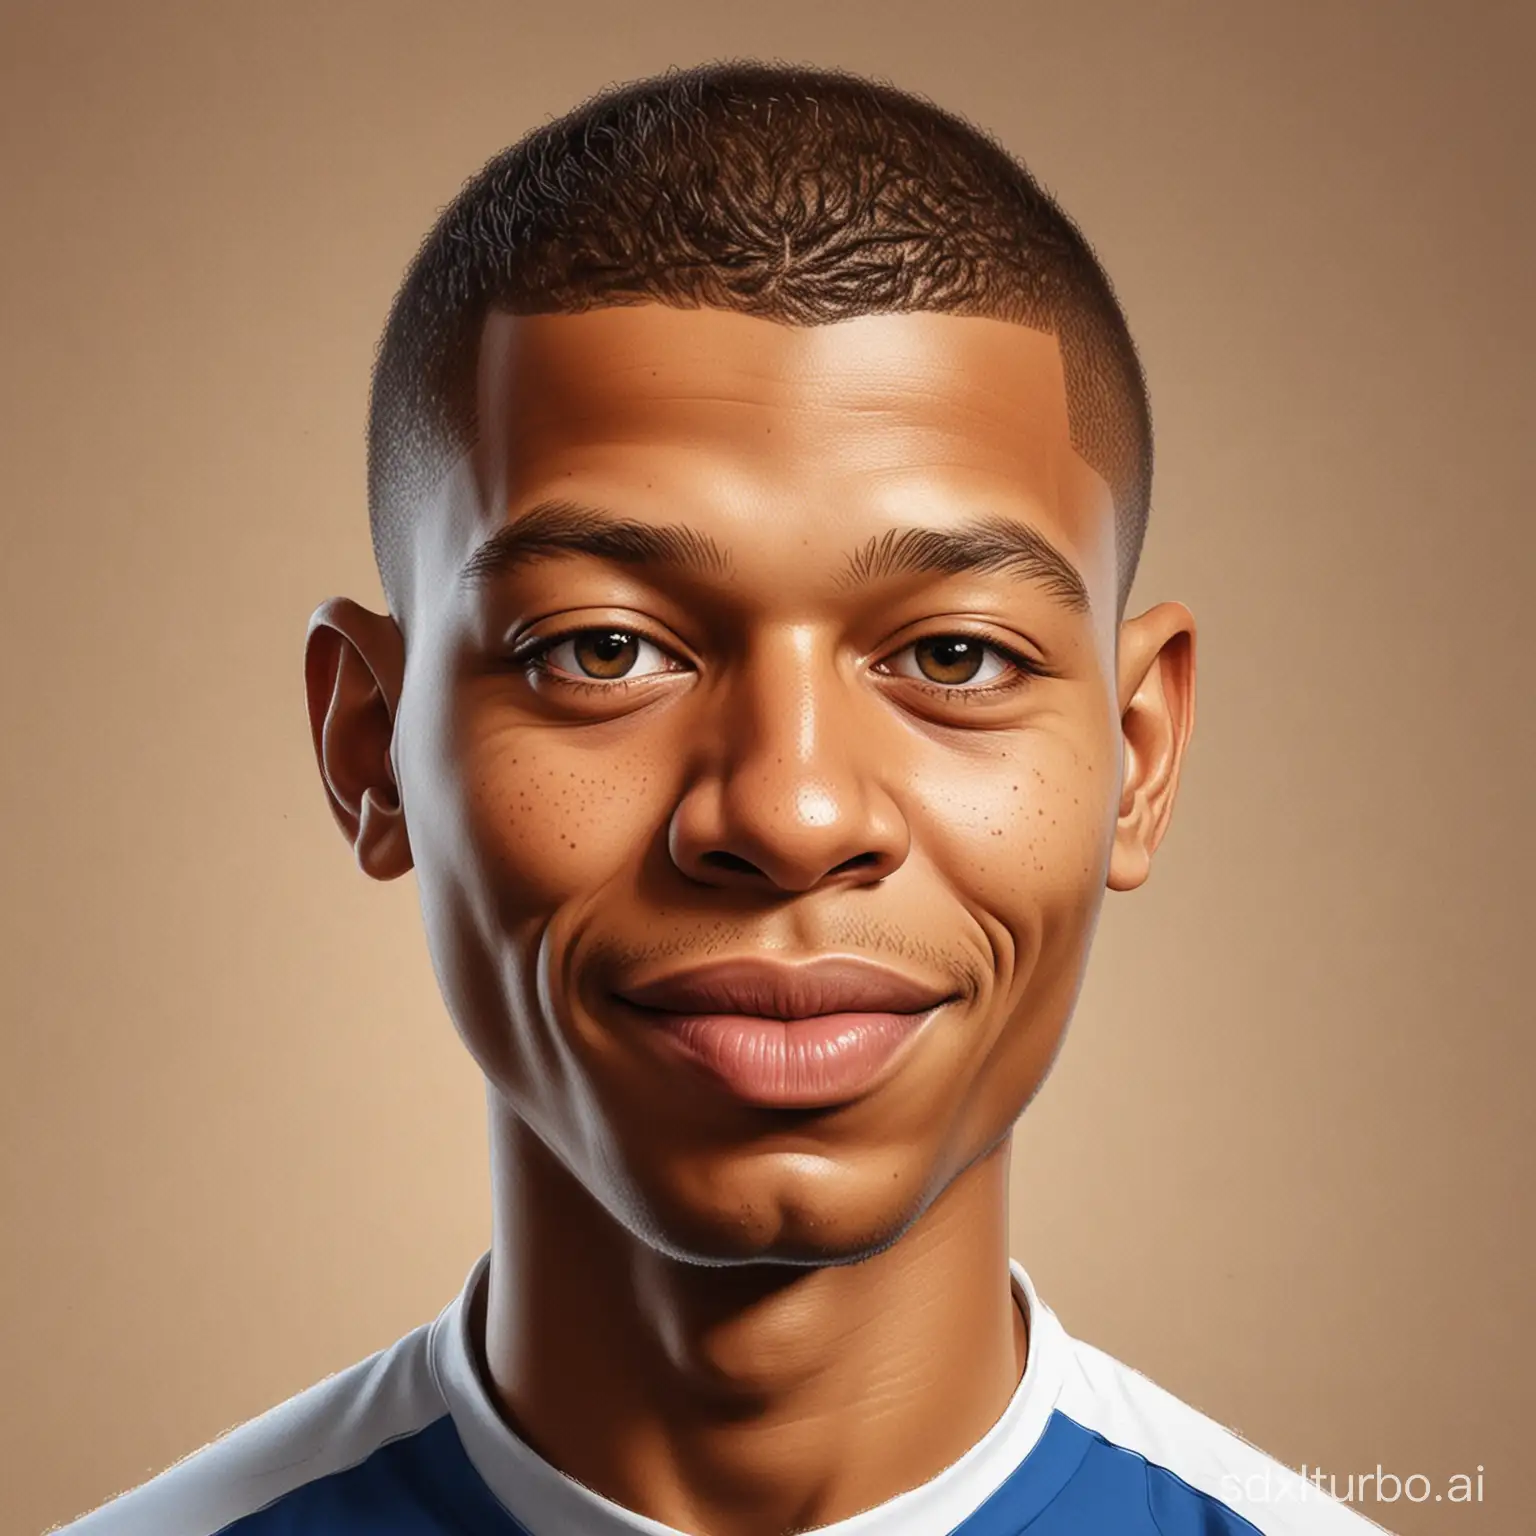 Caricature of a French football player Mbappe

